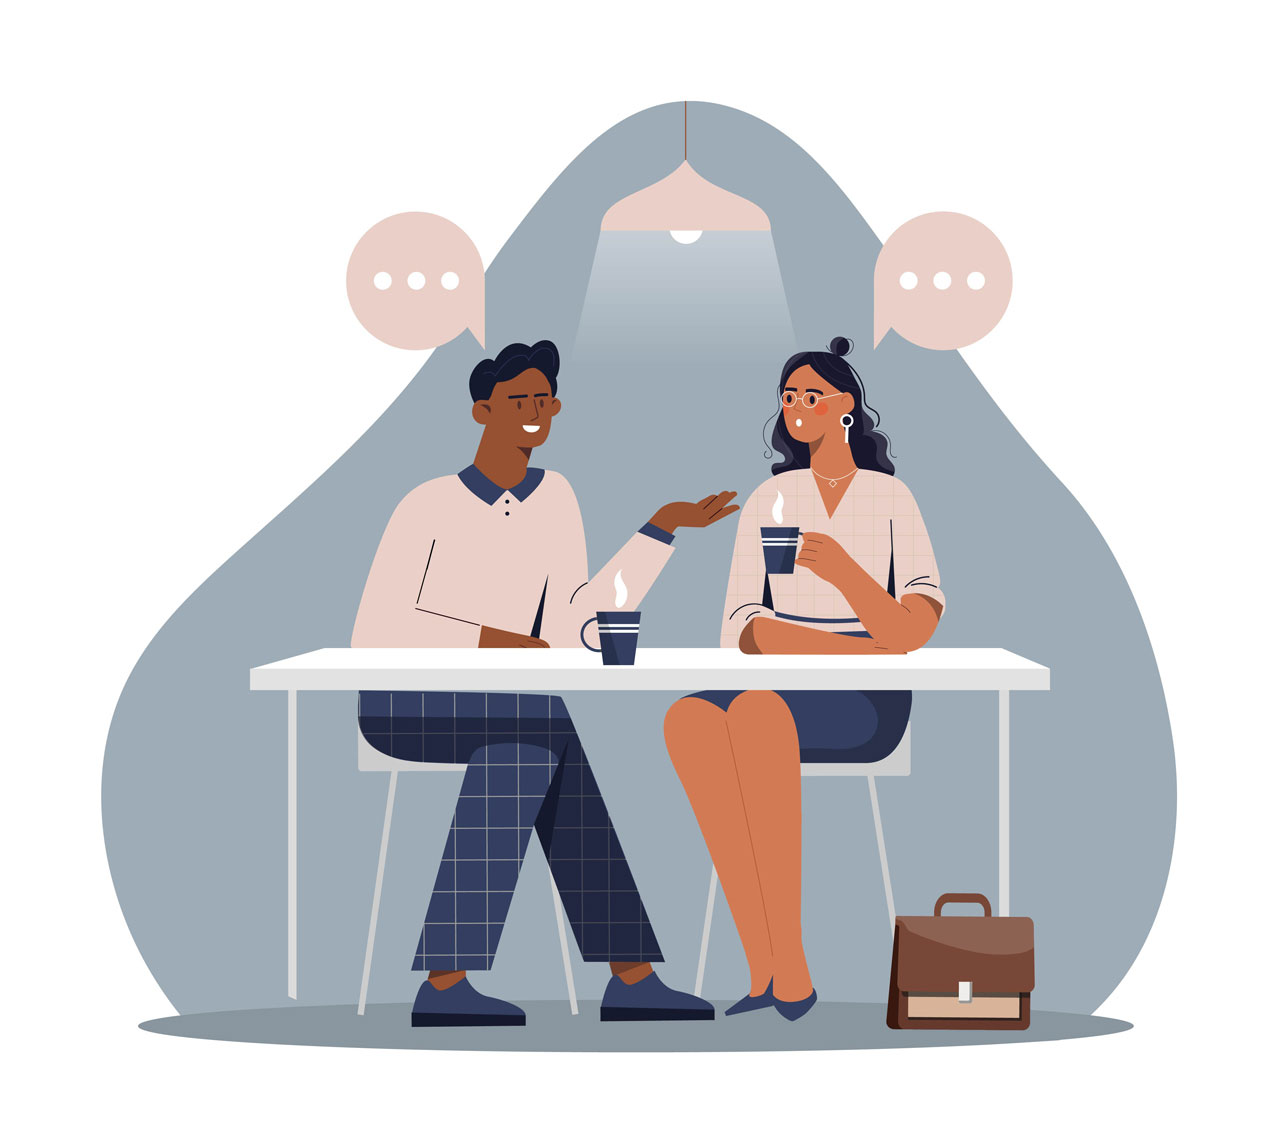 People talking clipart couple with hot drinks cartoon image